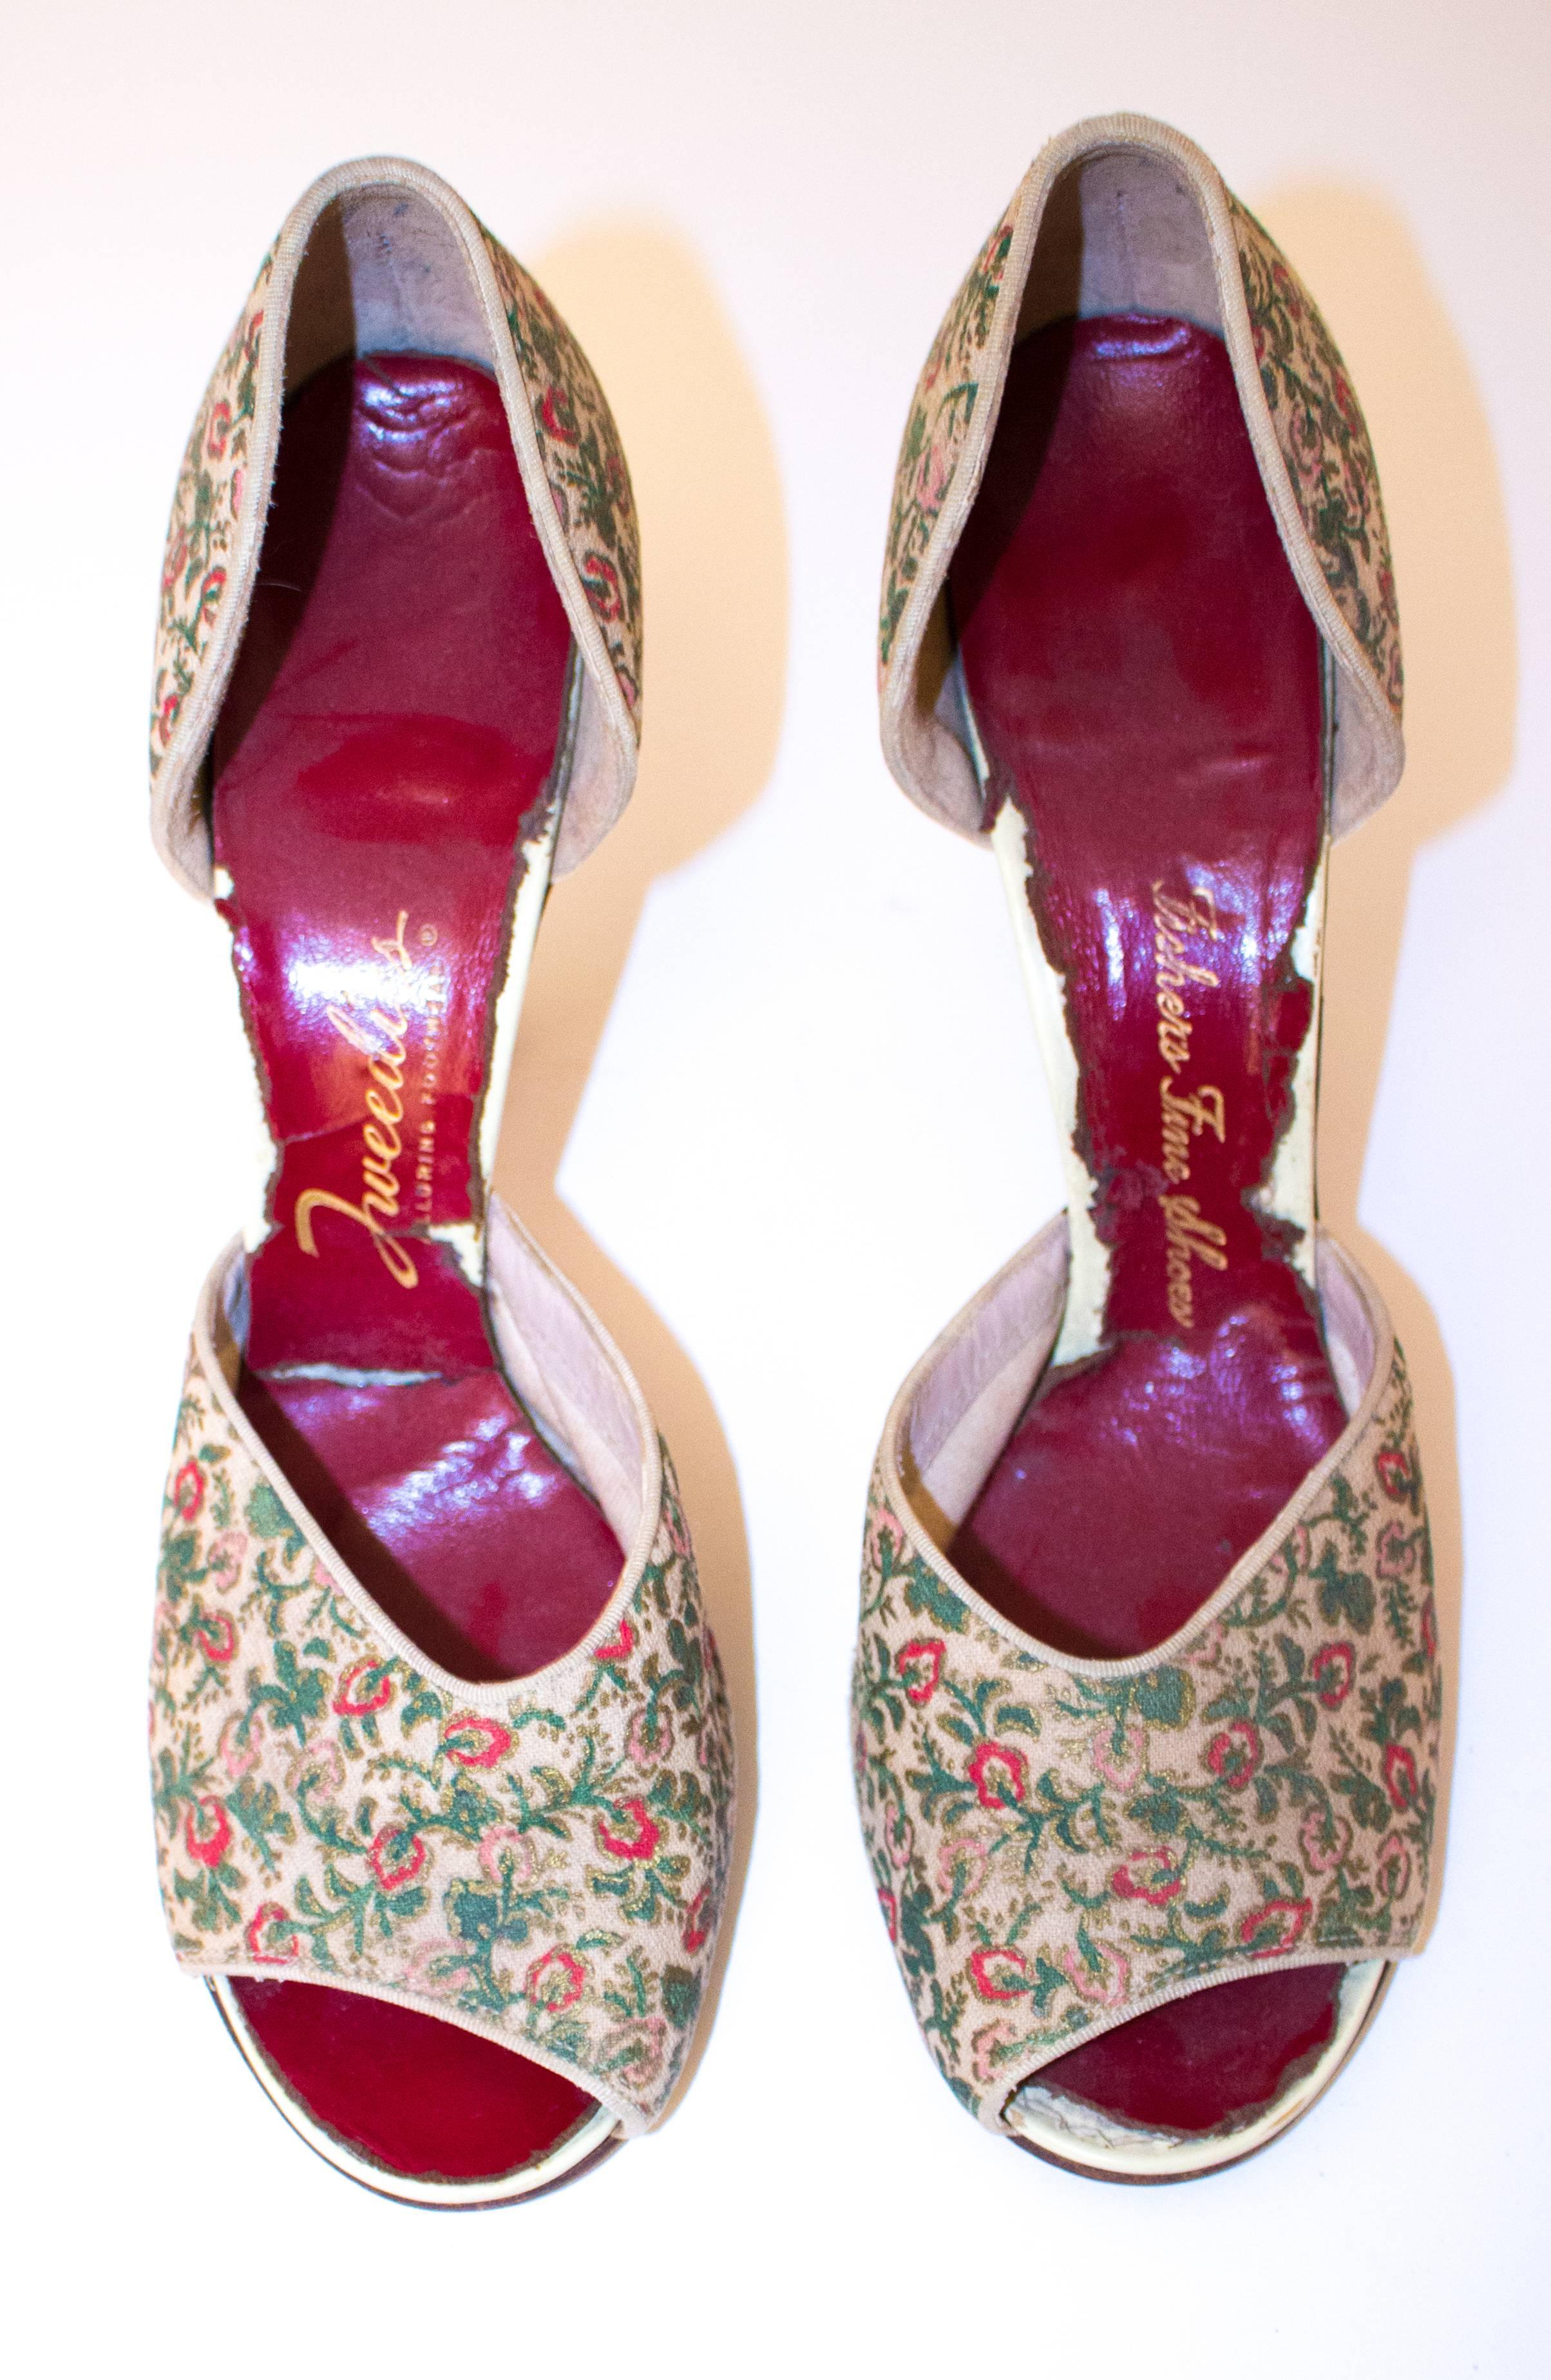 50s Red, Pink & Green Floral Peep-toe Heels. Leather soles. 

Measurements:
Insole: 10"
Width: 3"
Heel Height: 3 3/4"